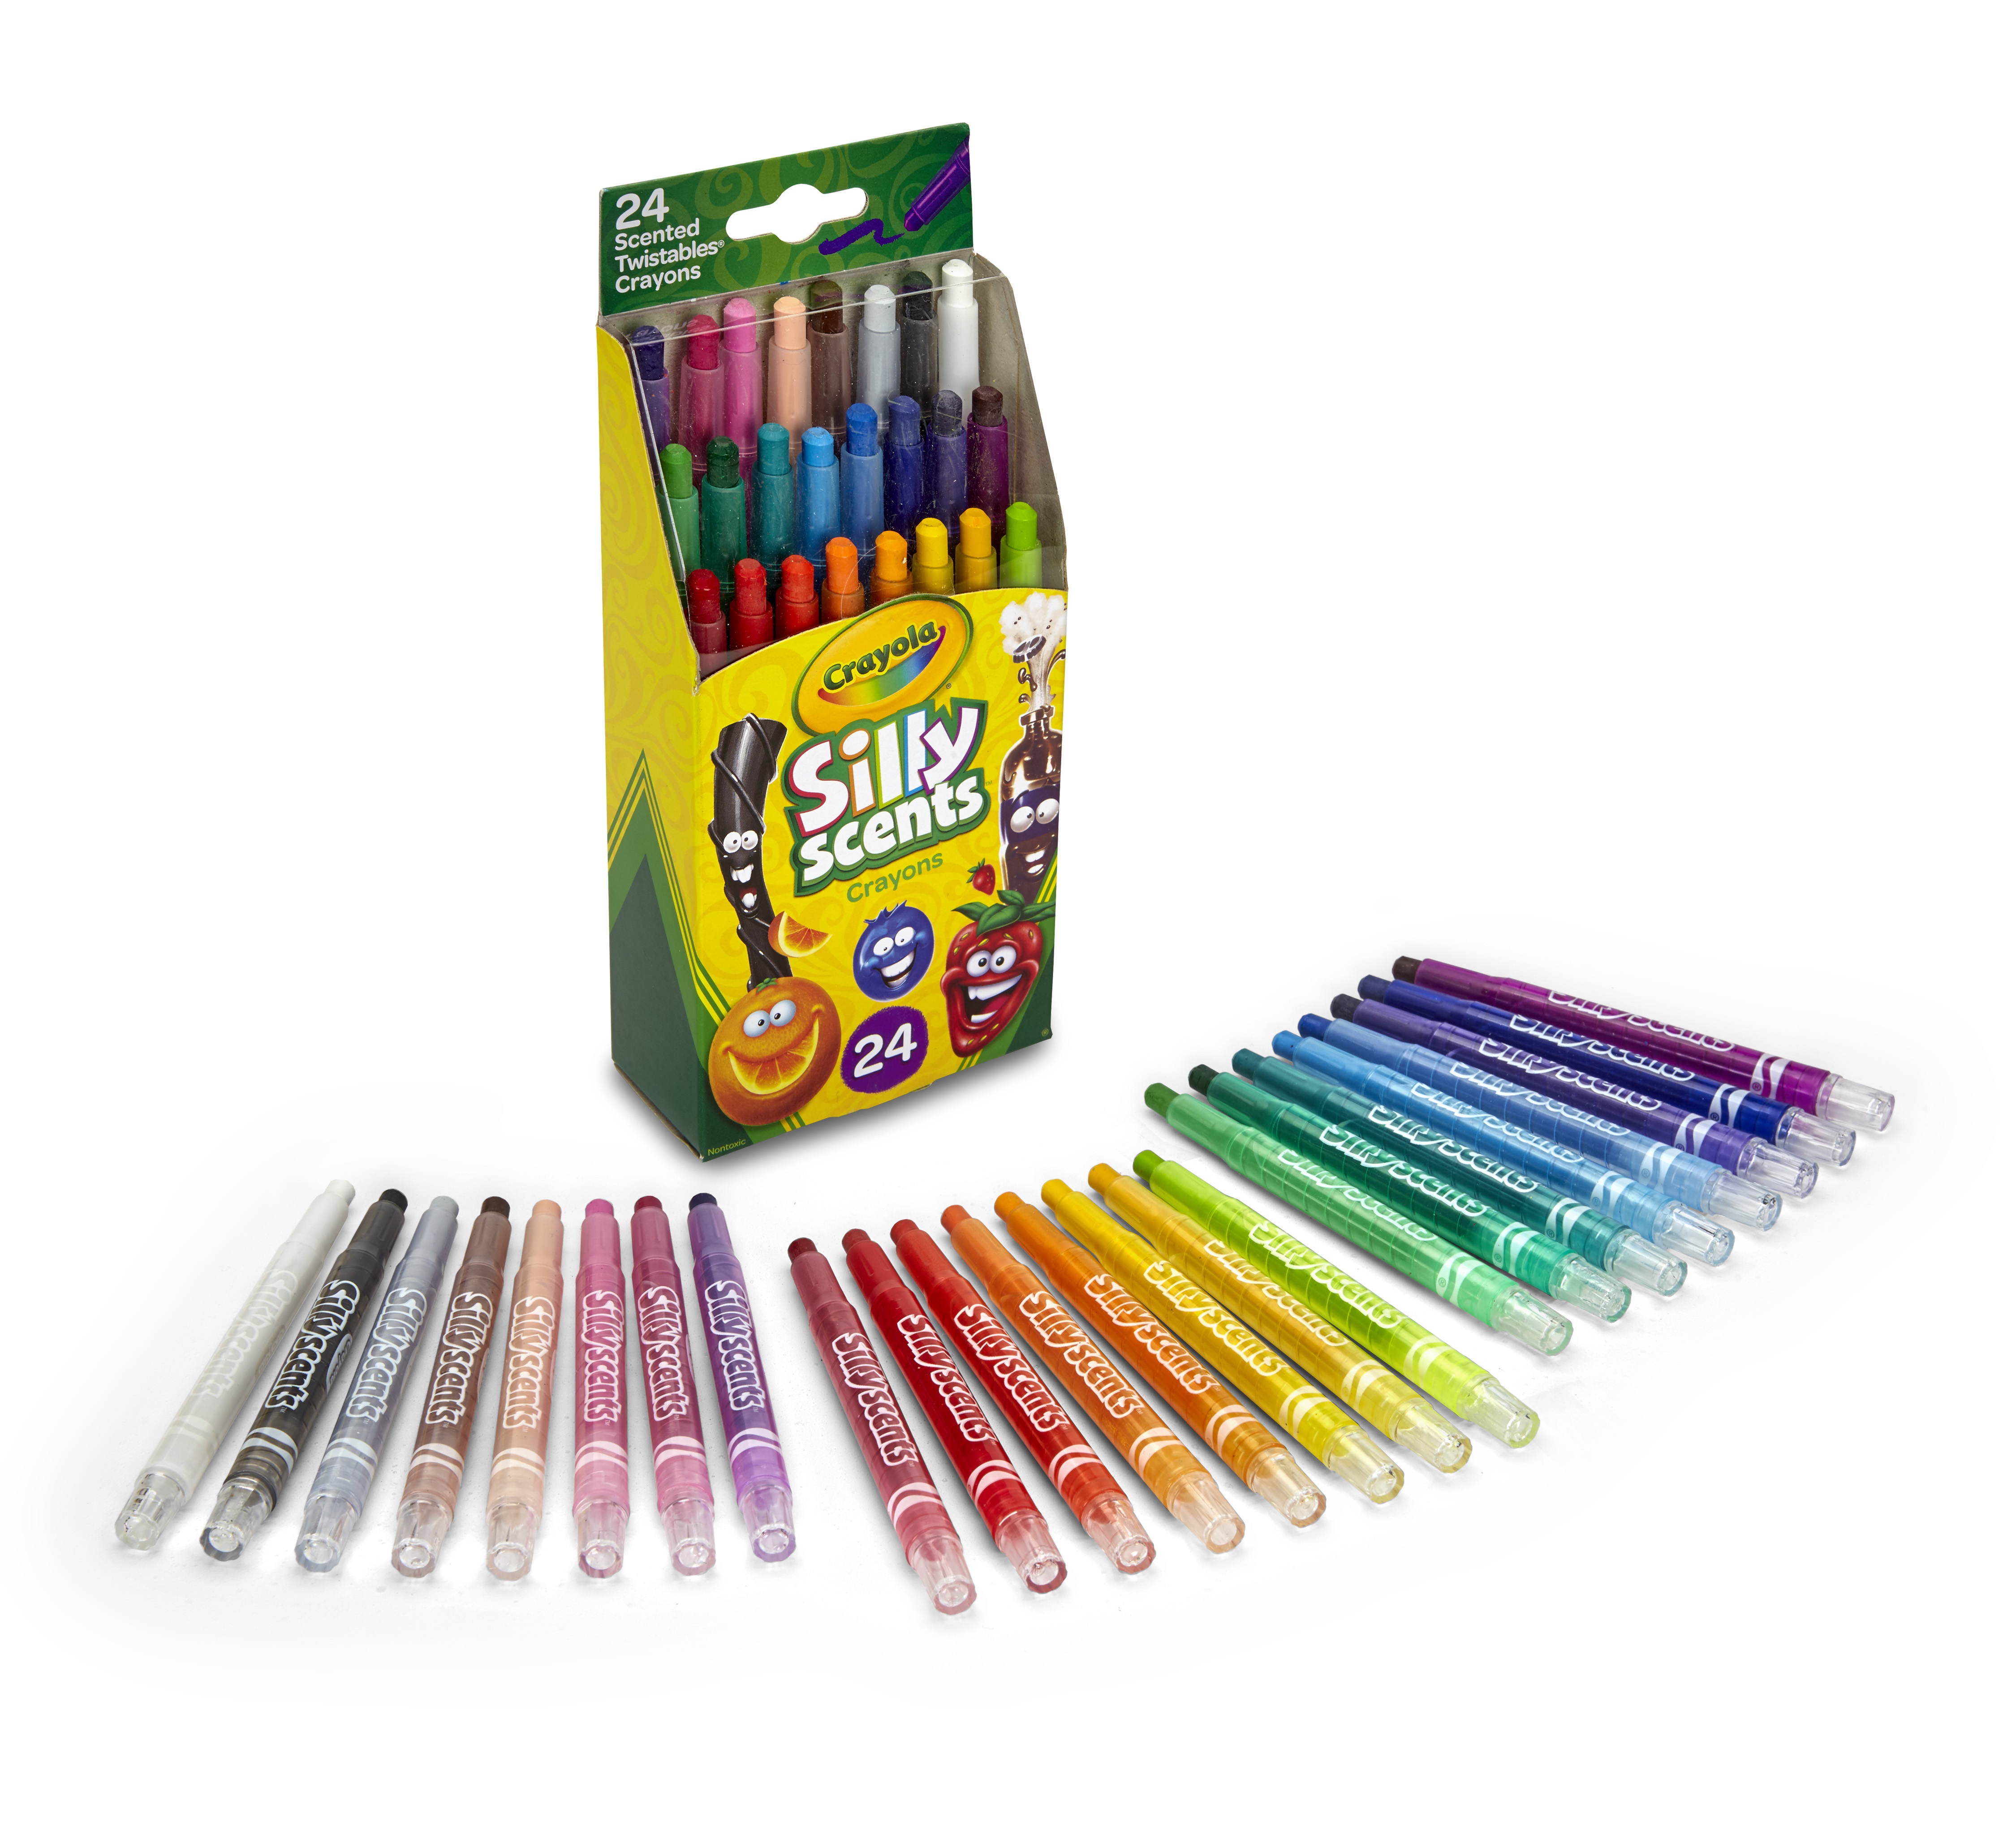 Crayola Silly Scents Twistables Crayons, Sweet Scented Crayons for Kids, 24 Count - image 5 of 8